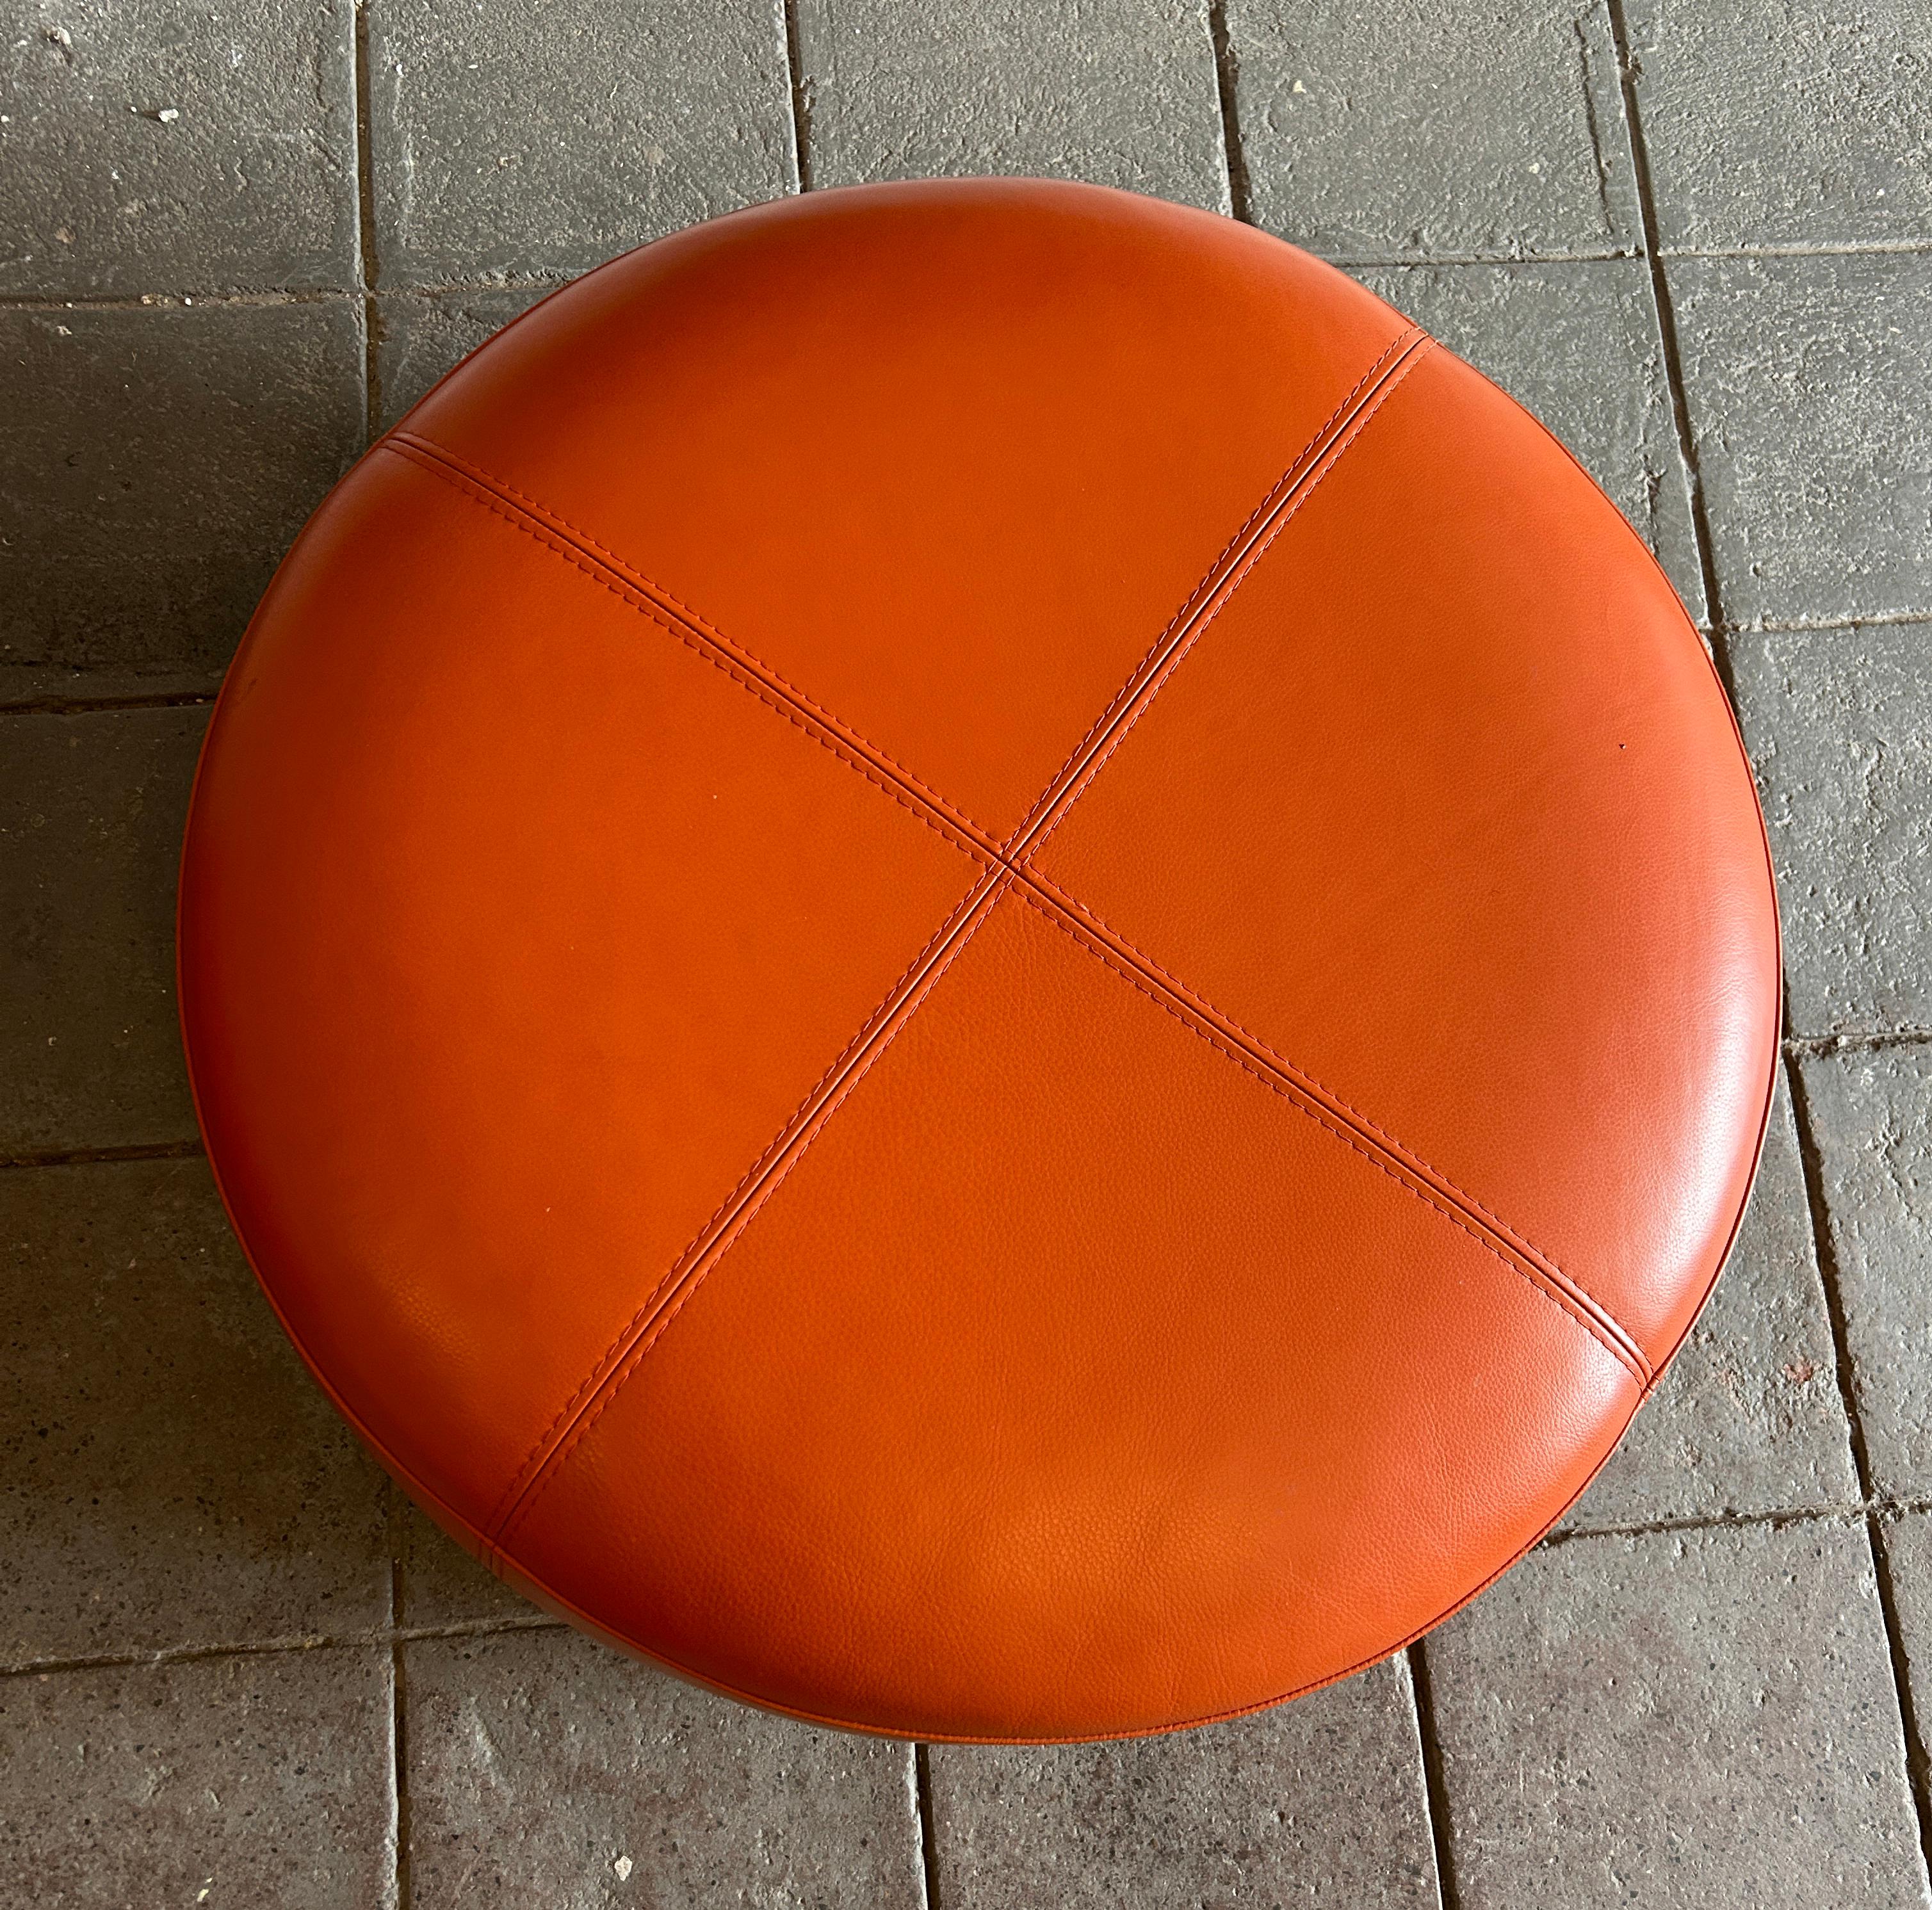 Mid-Century Modern Round Orange Leather Ottoman Stool Pouf. Very Soft Leather with small Chrome Legs. Very Clean all around. Nice stitching. No Label. Great small stool ottoman chair pouf. Great Color. Located in Brooklyn NYC.

Measures 32